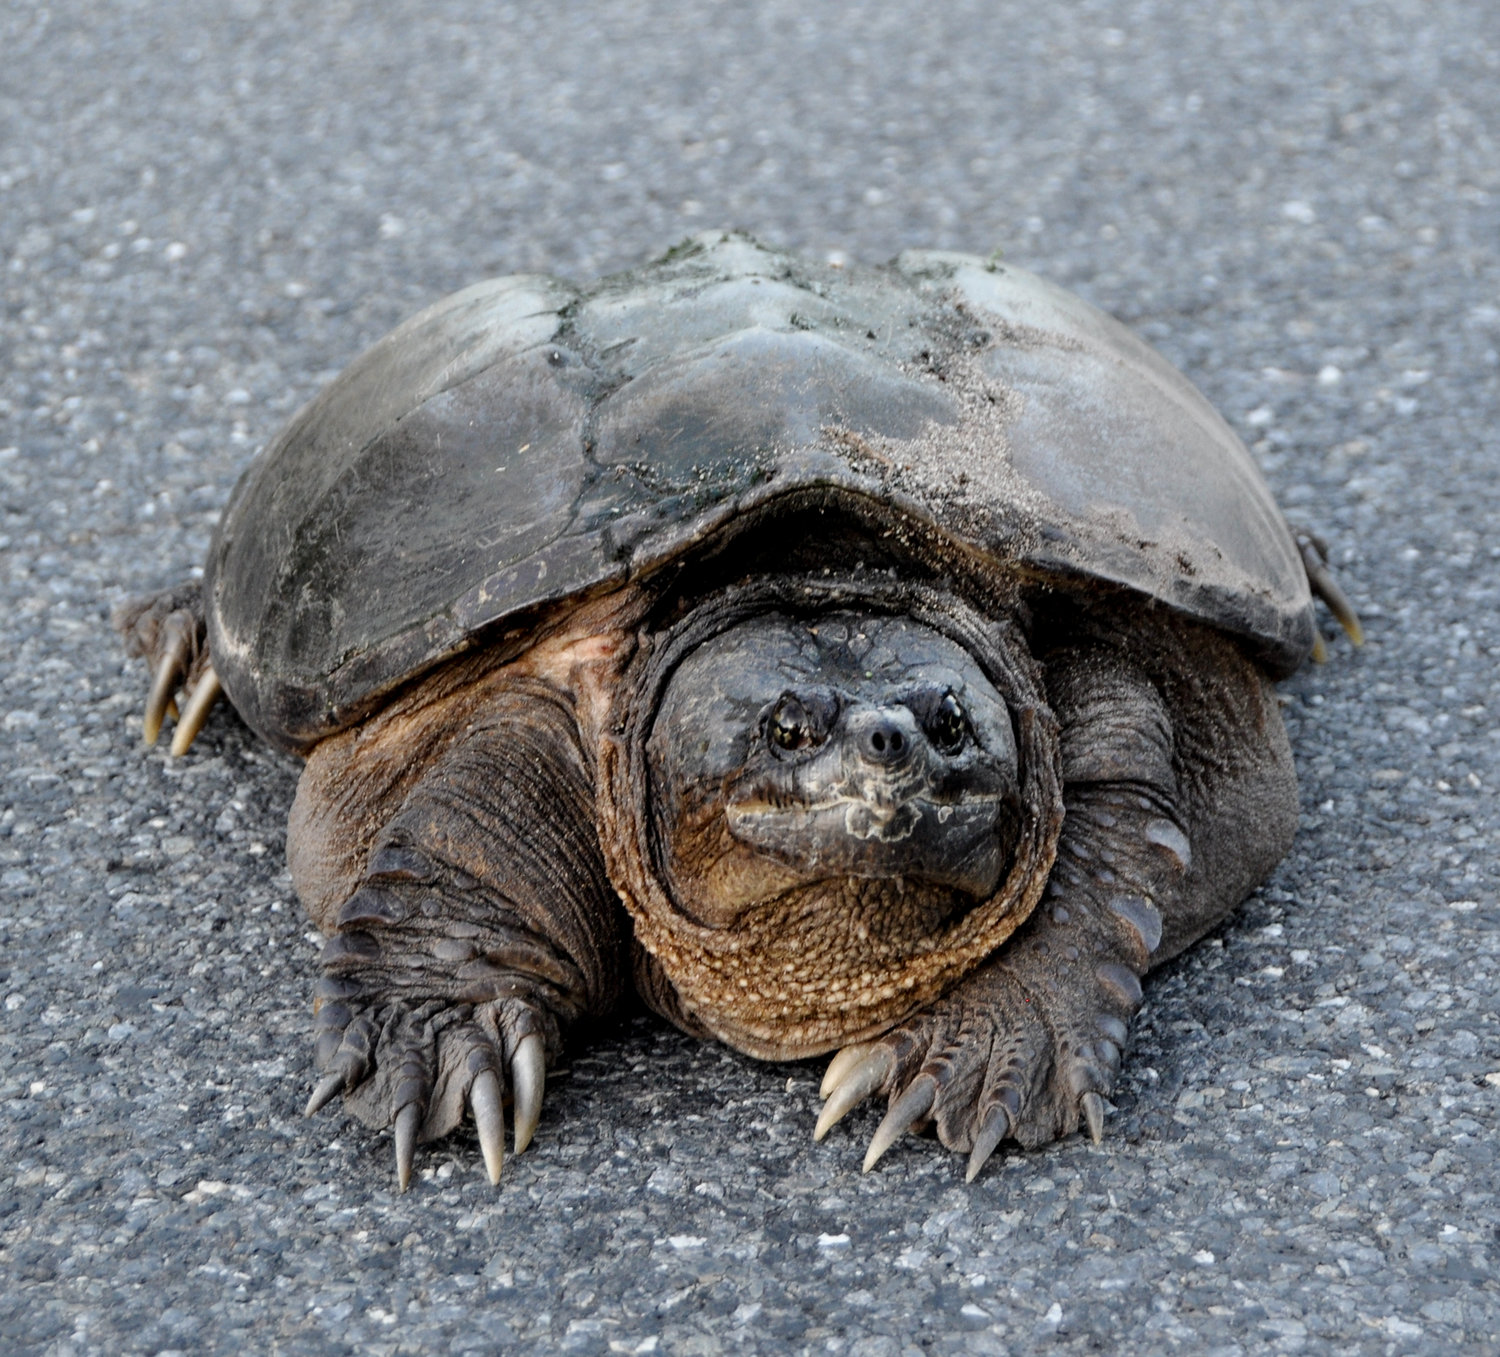 The snapping turtle appeared prehistoric and motionless, so I stopped the car and got out as Dharma wagged enthusiastically, unaware of what the old broad could do to her.